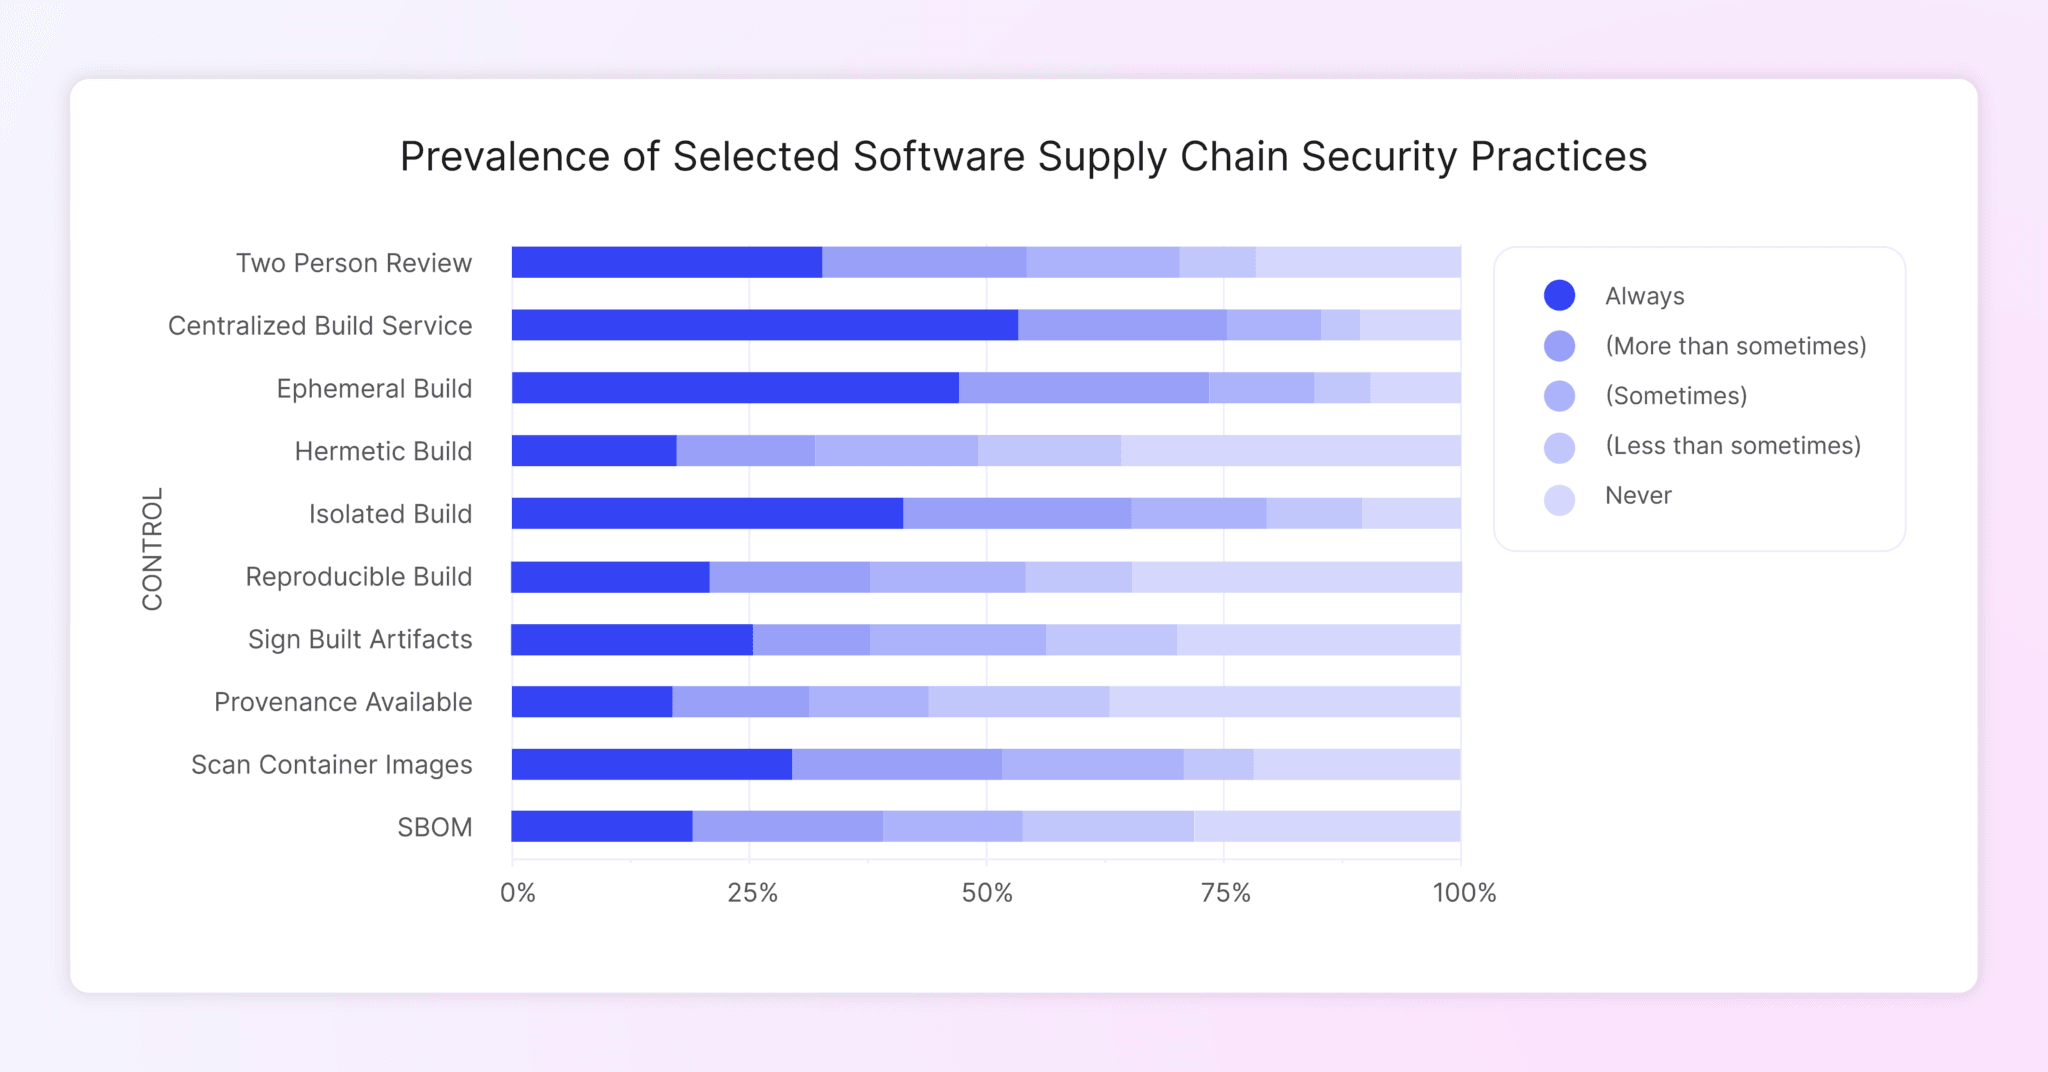 Prevalence of Selected Software Supply Chain Security Practices